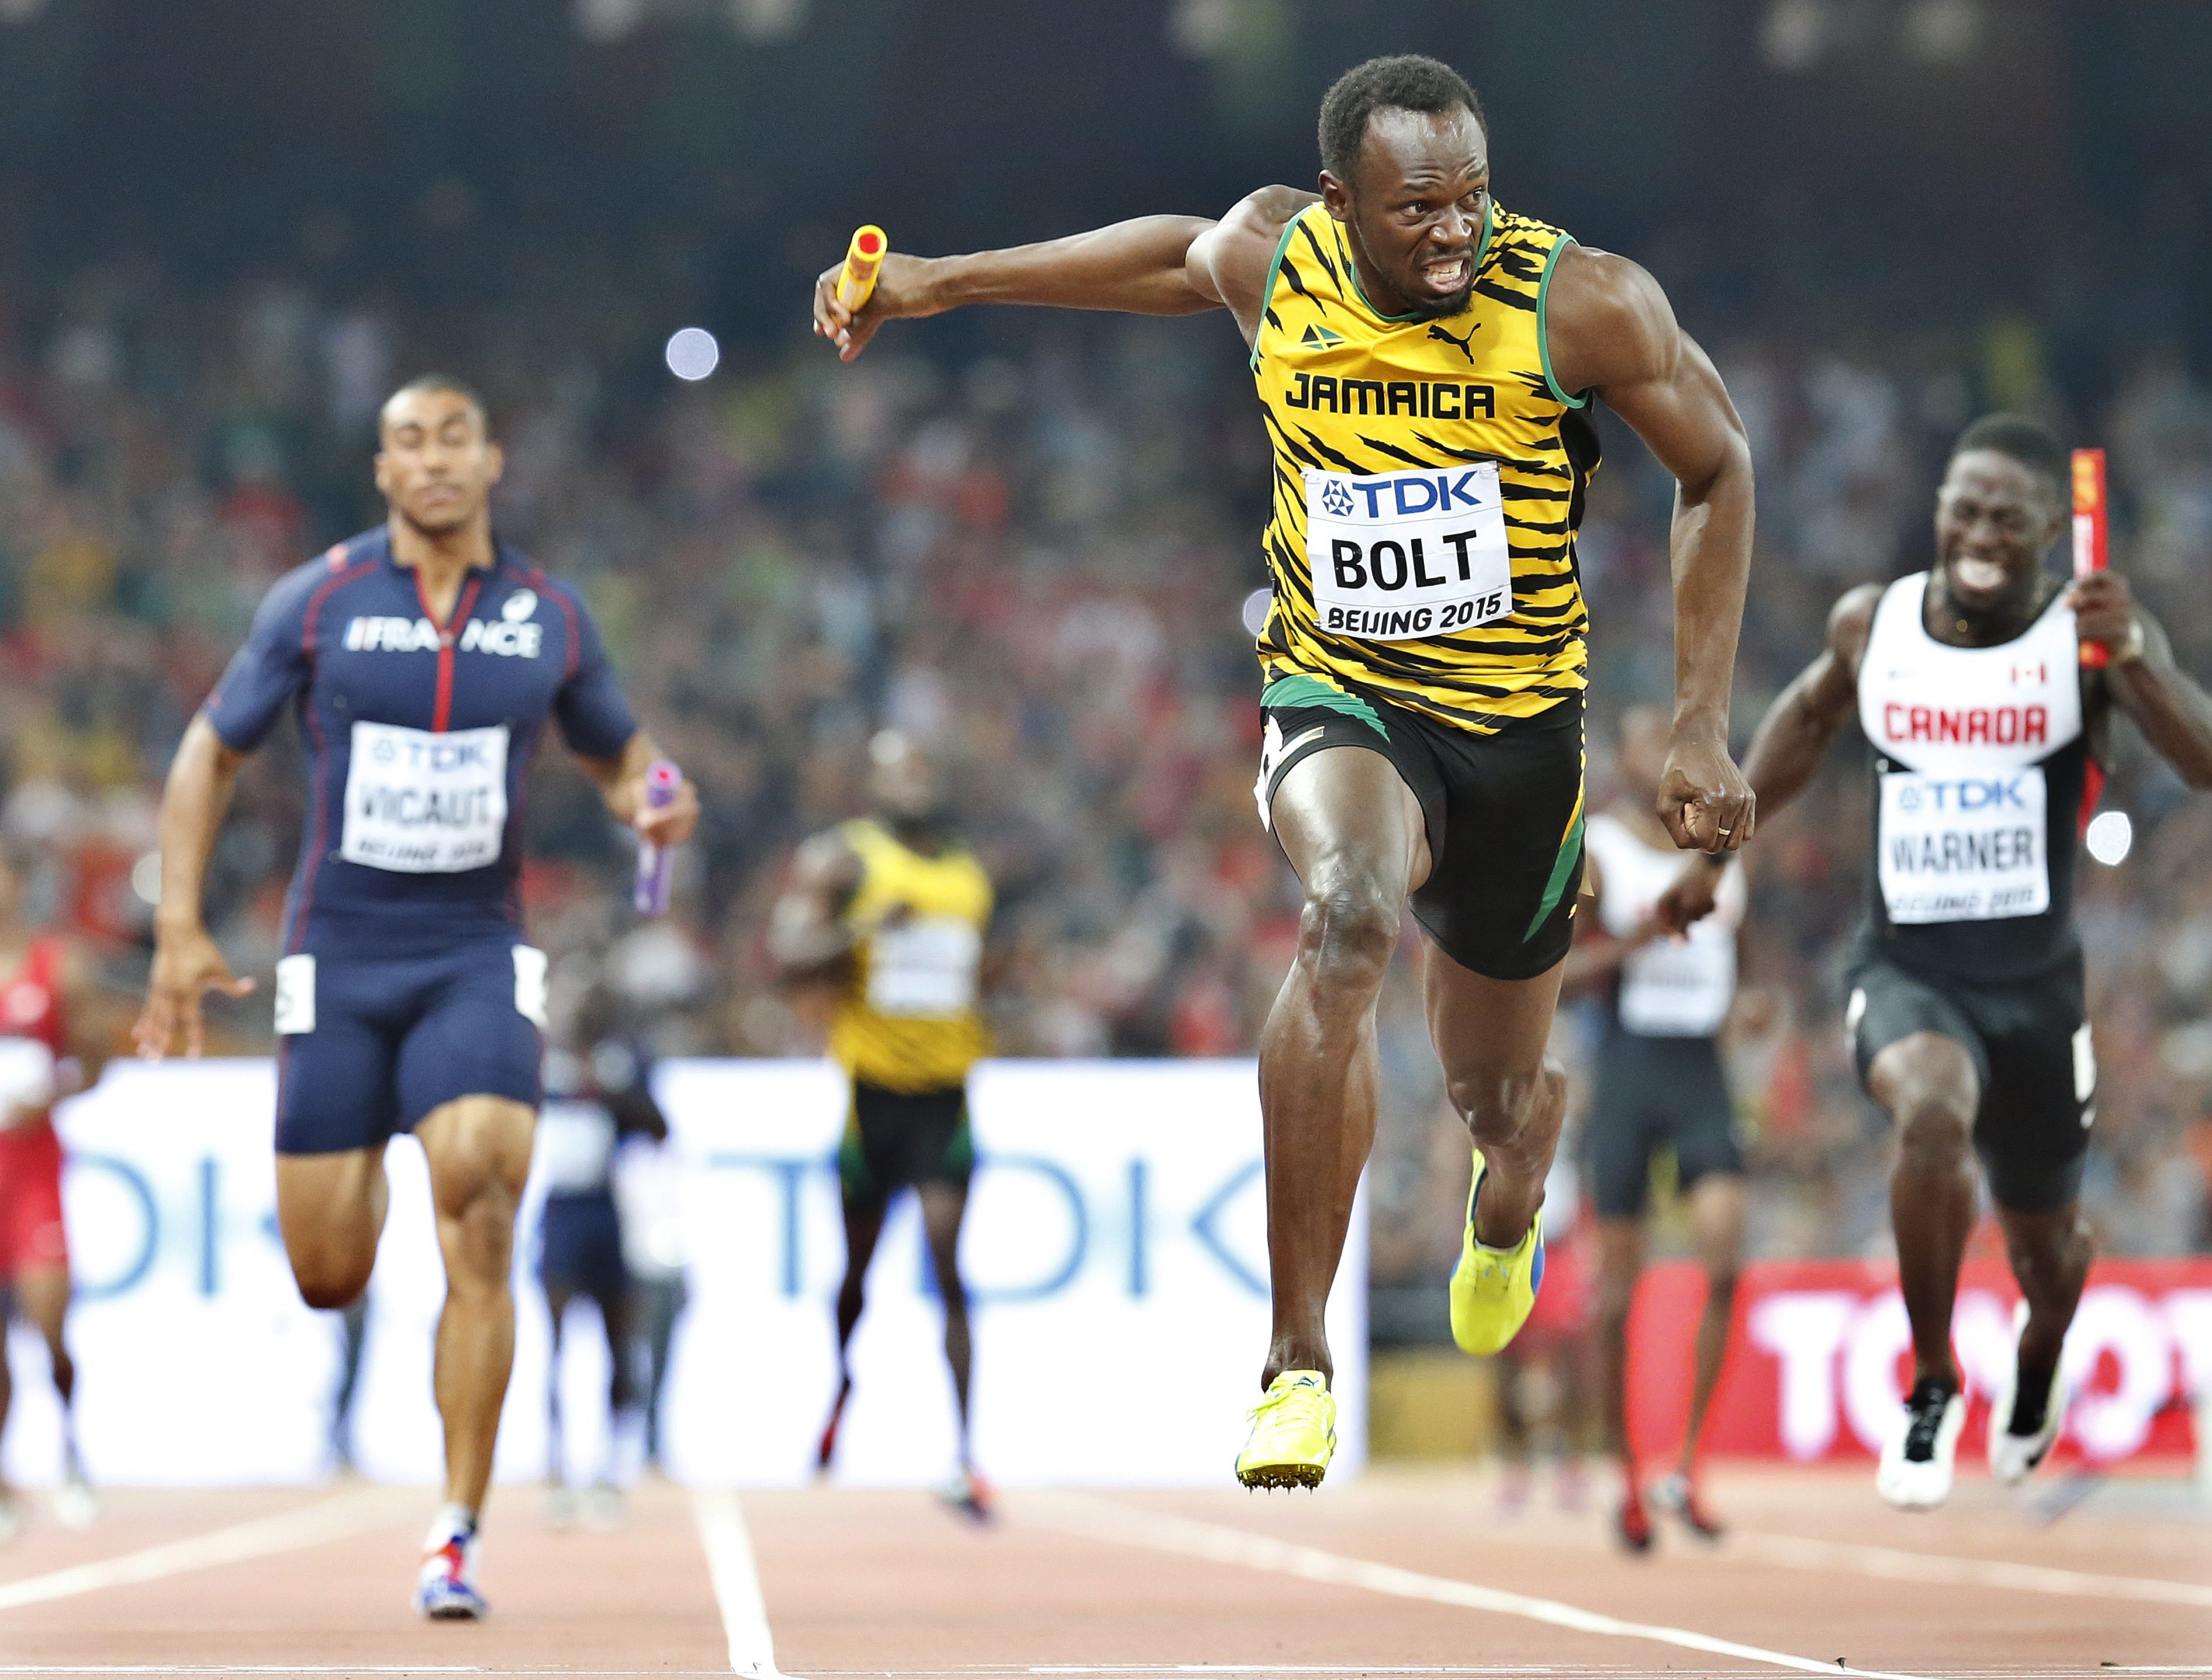 Jamaica's Usain Bolt brings home gold in the 4x100m men at the 2015 IAAF World Championships in Beijing on Saturday. Photo: EPA